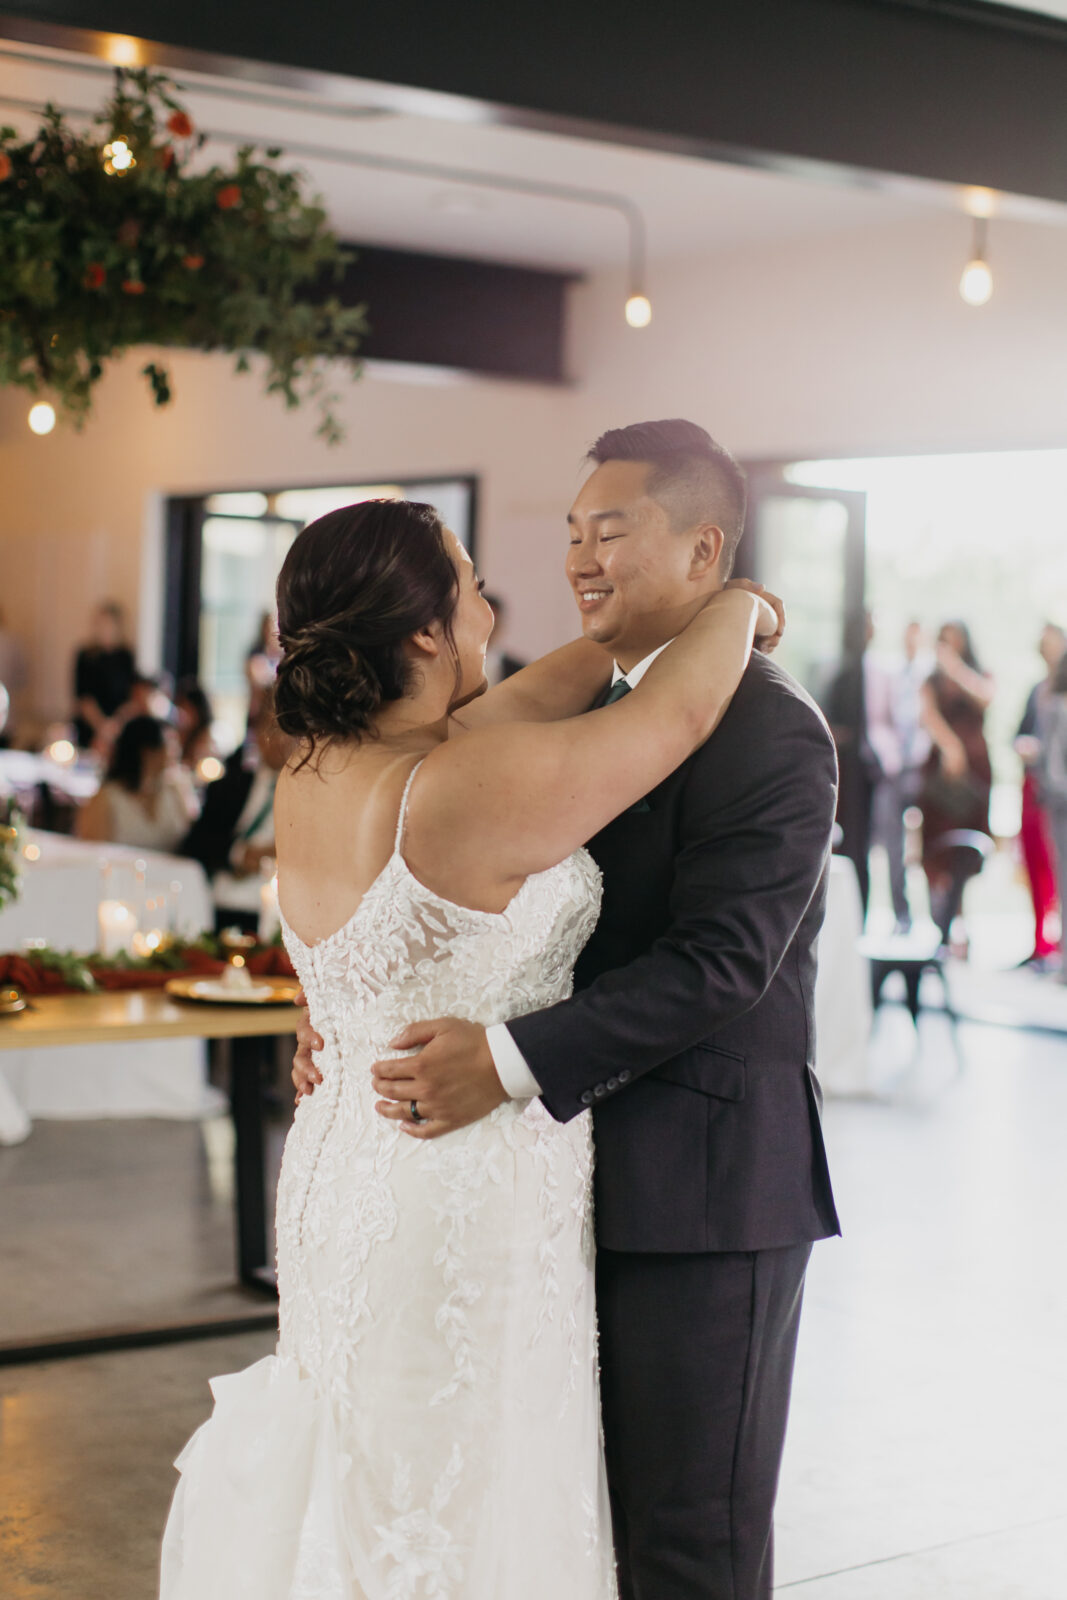 A couple's first dance as newlyweds